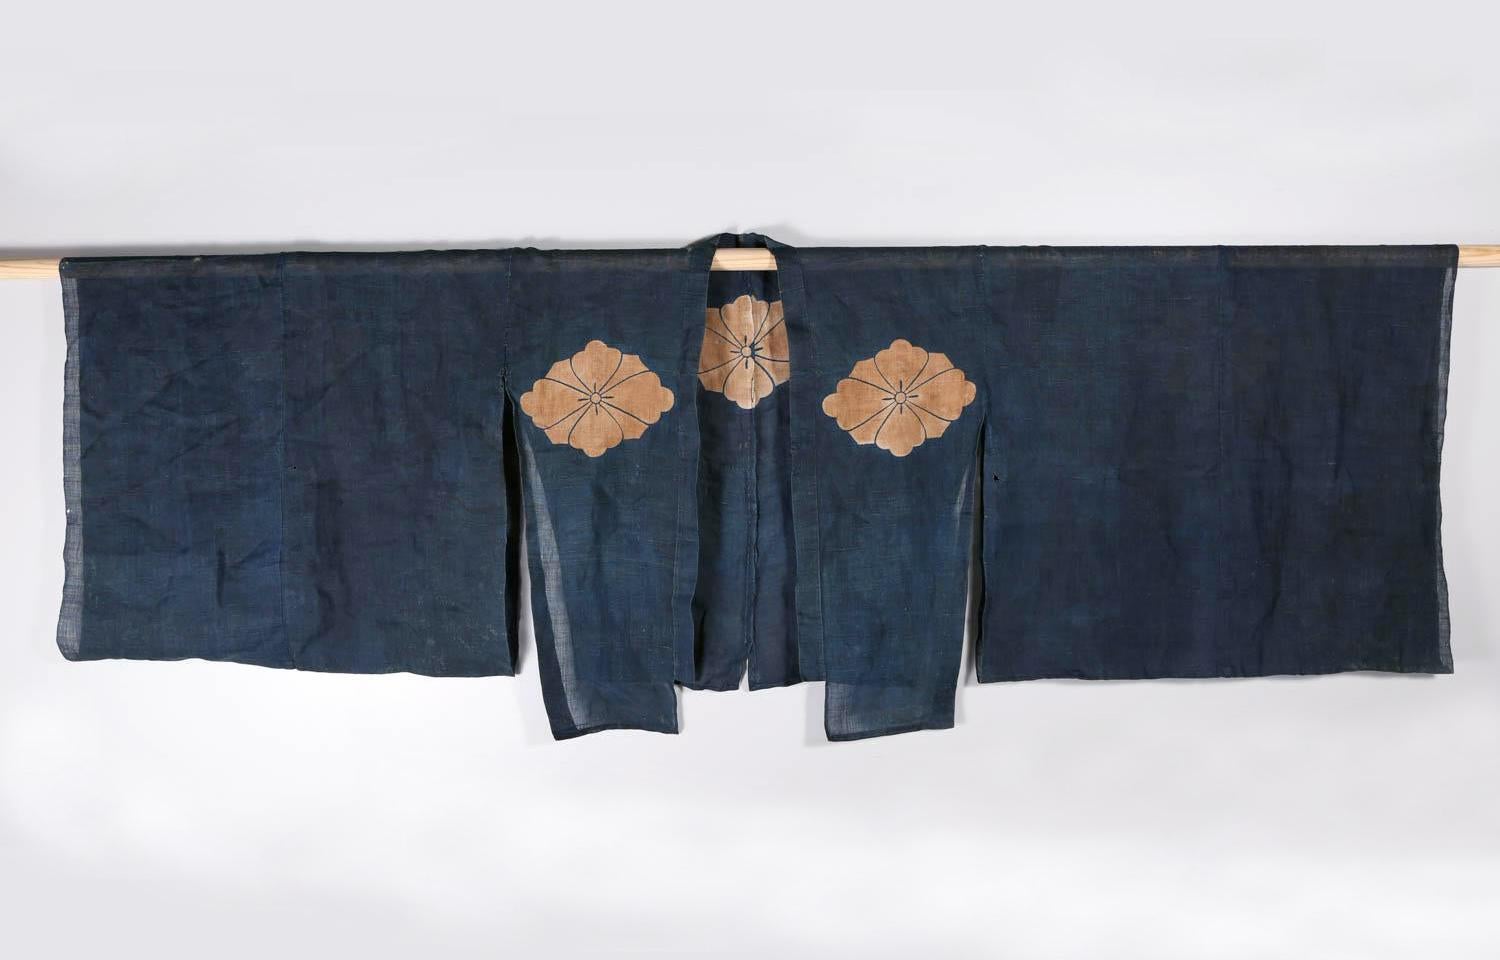 A two-piece Japanese festival costume based on Kyogen theater performance circa late 19th century (Meiji Period). The matching assemble consists of an oversize jacket (Suo) and a pair of trousers (hakama). Made from a fine and gauze-like indigo dyed